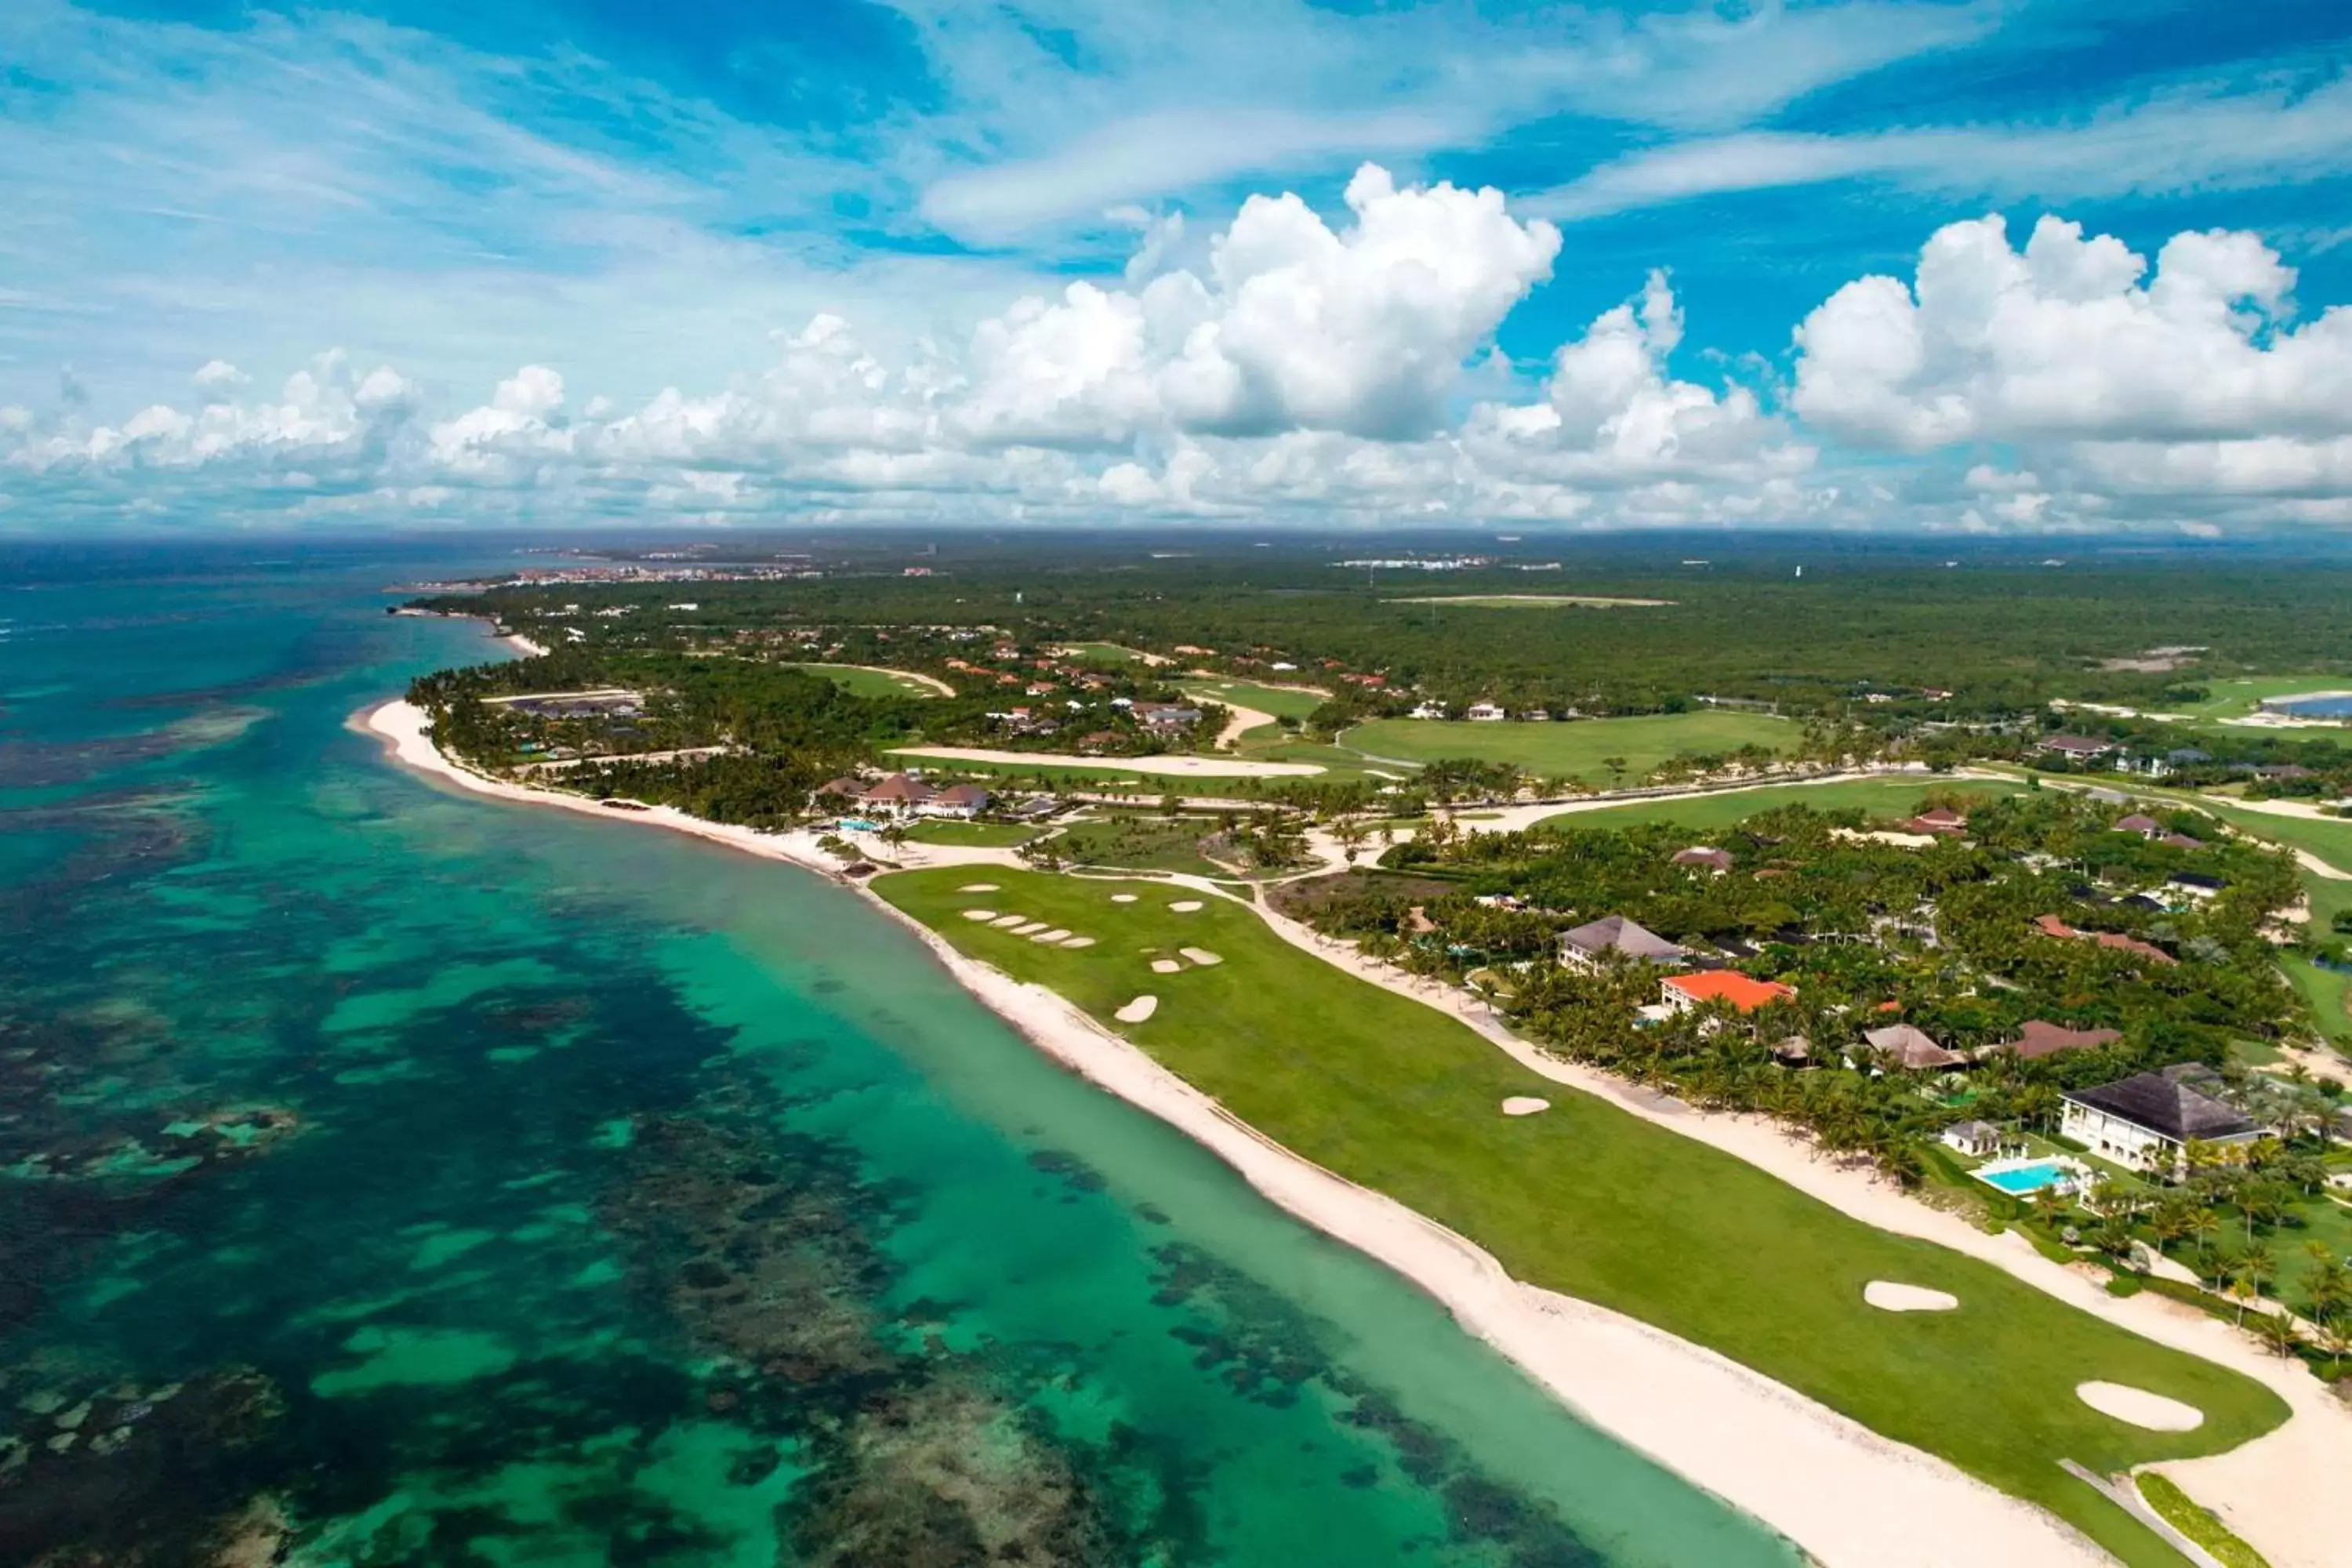 Golfcourse, Bird's-eye View in Four Points by Sheraton Punta Cana Village